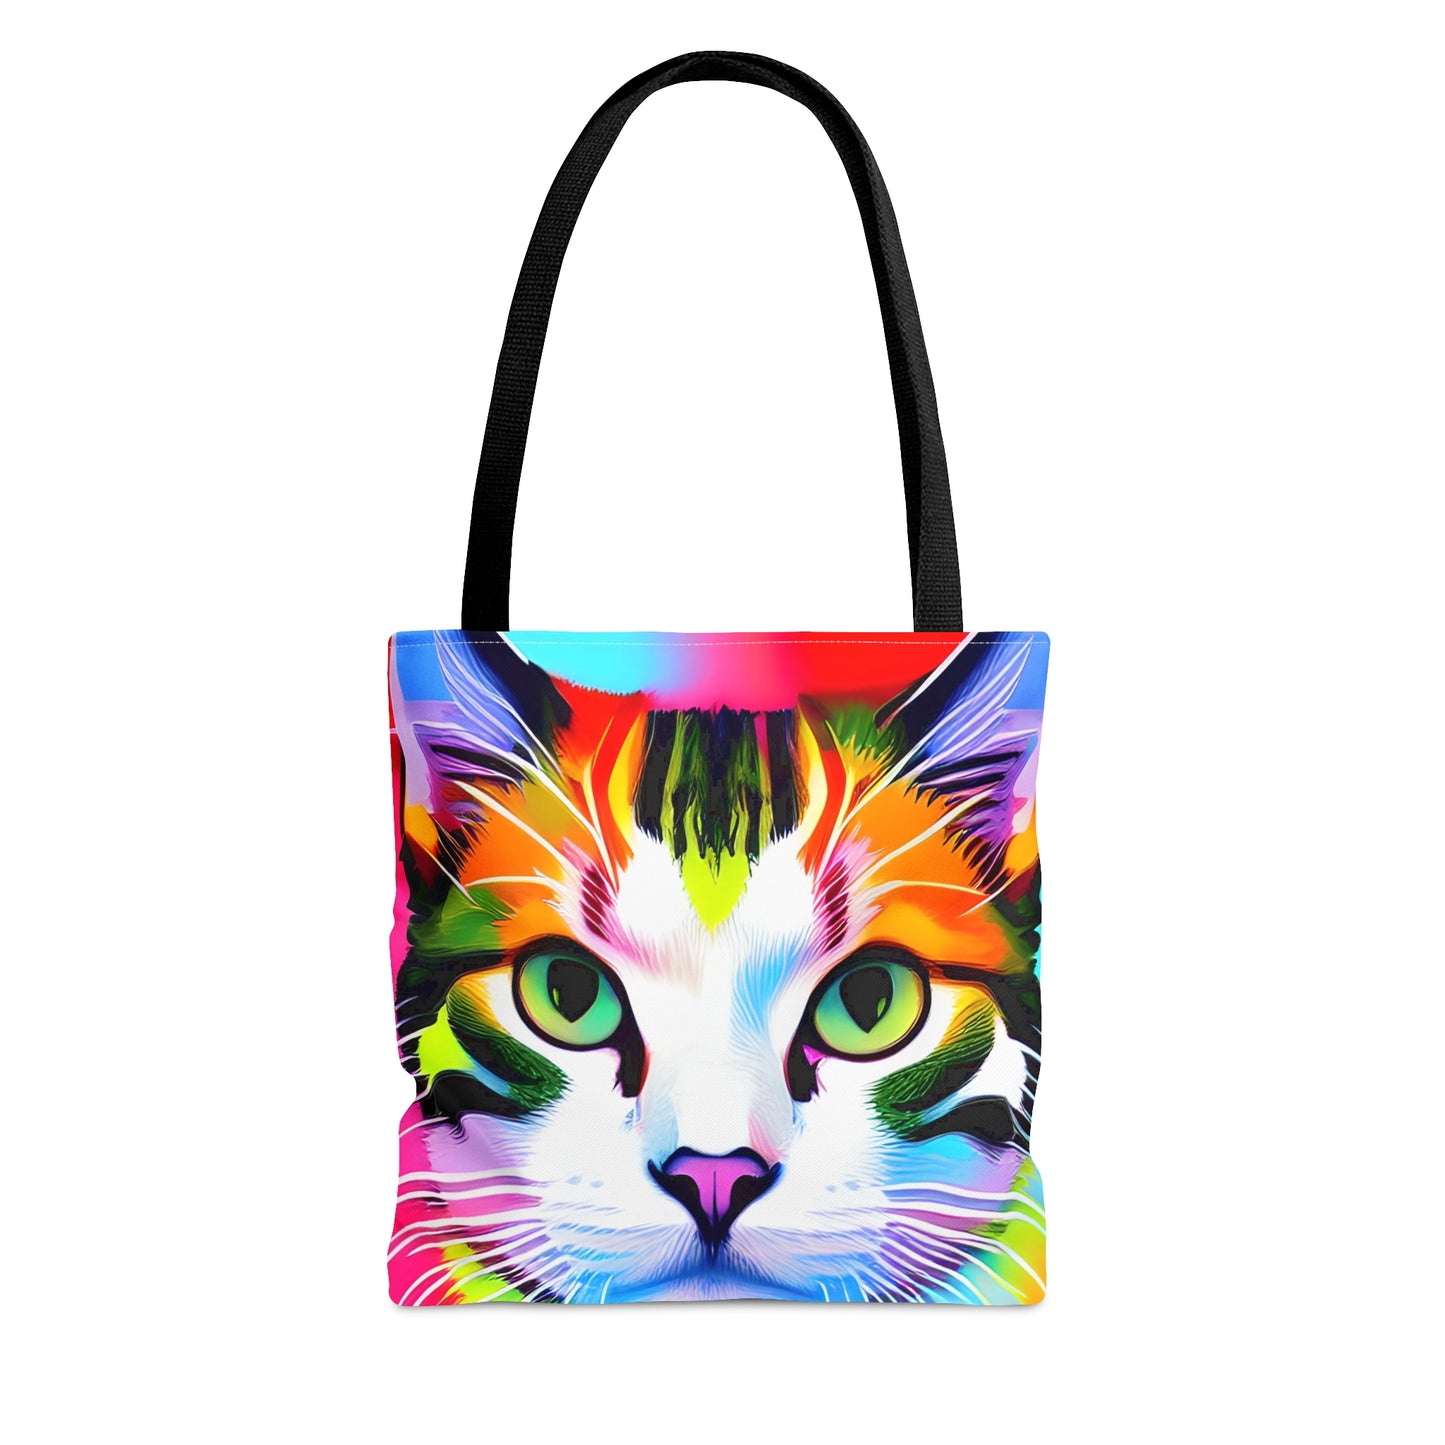 Colorful Cat Tote